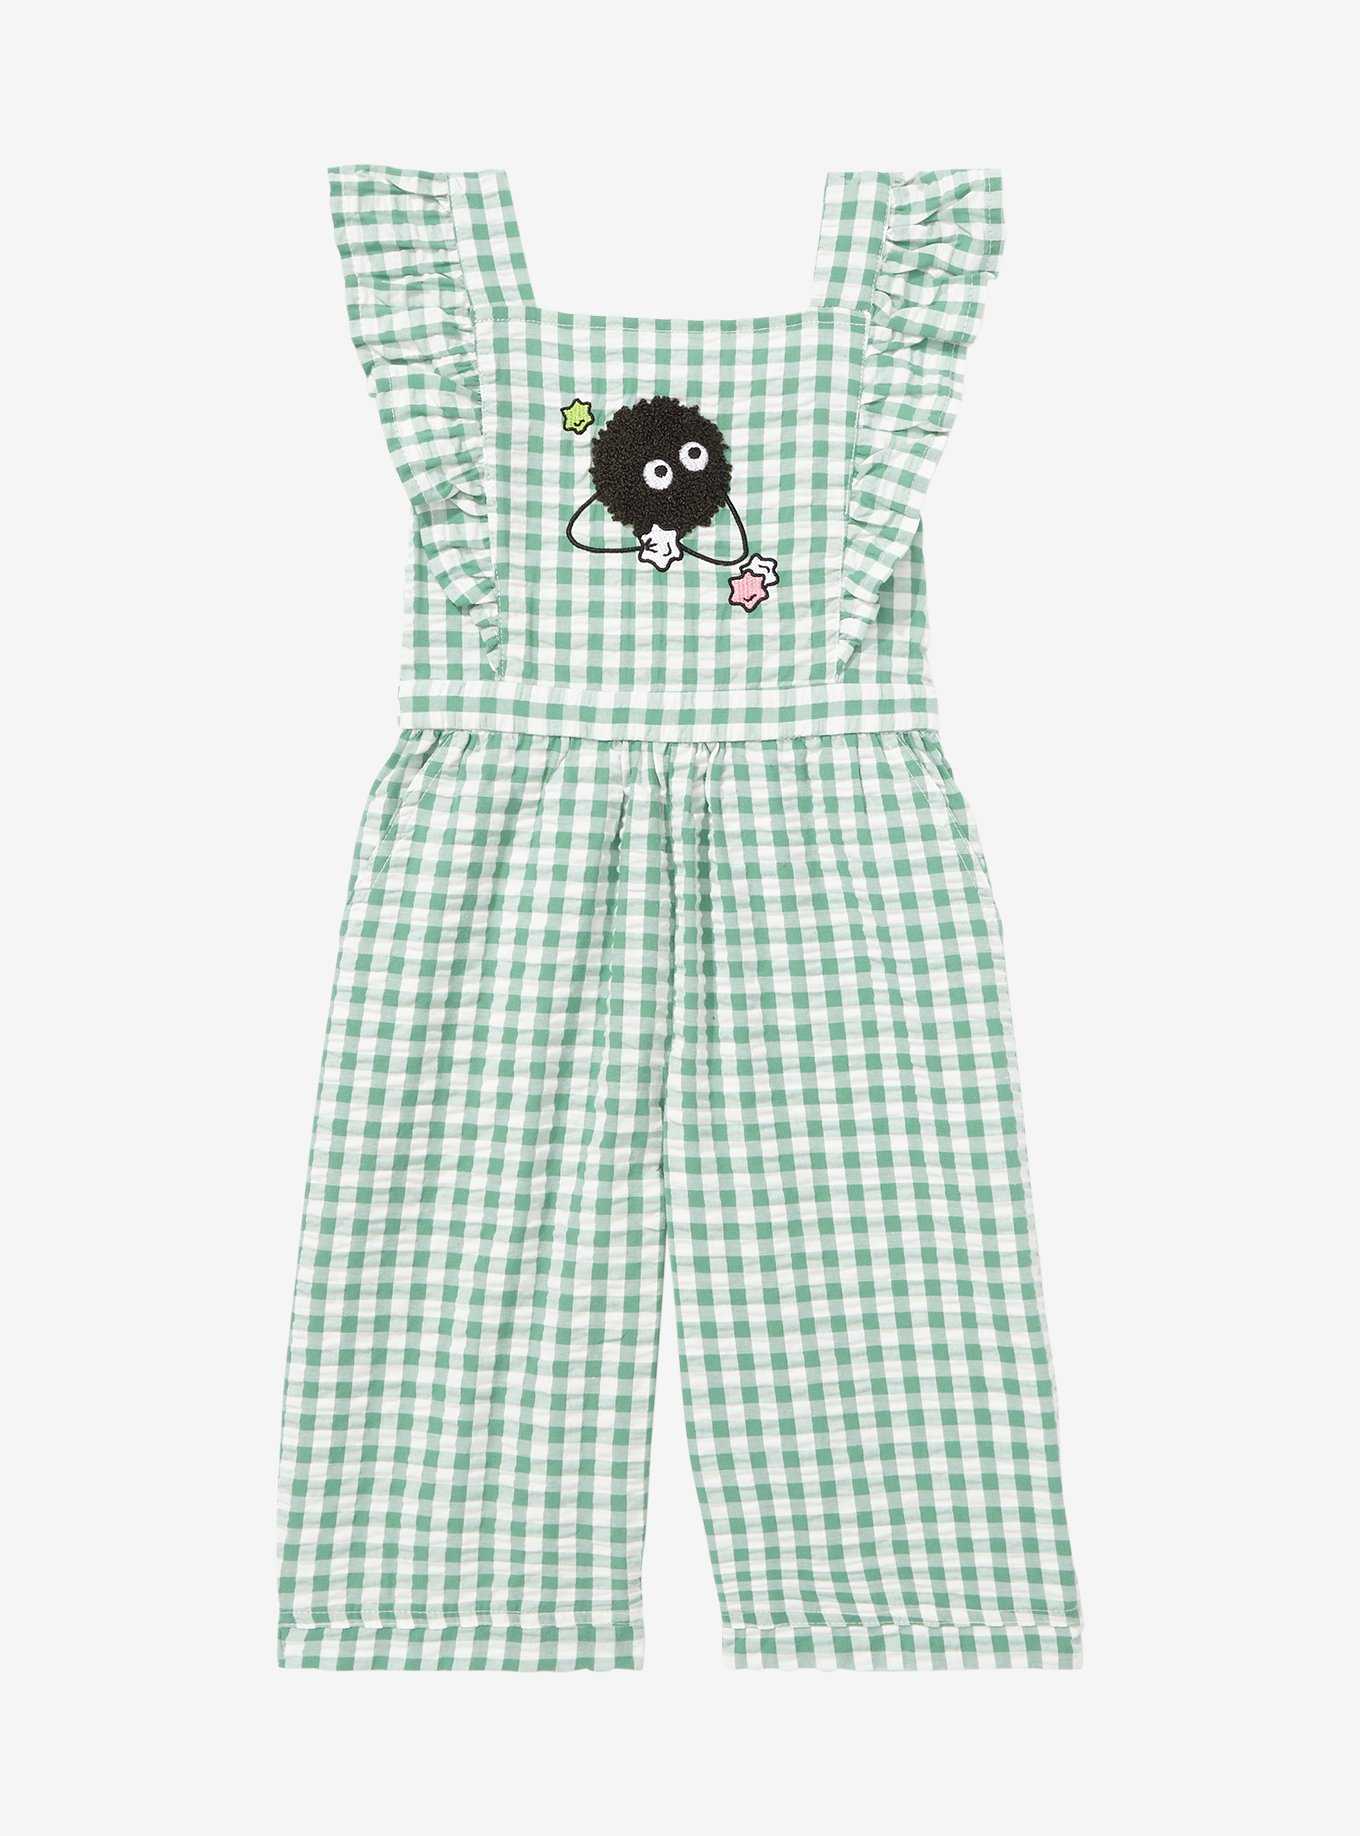 Our Universe Studio Ghibli Spirited Away Soot Sprite Toddler Ruffle Romper - BoxLunch Exclusive, , hi-res